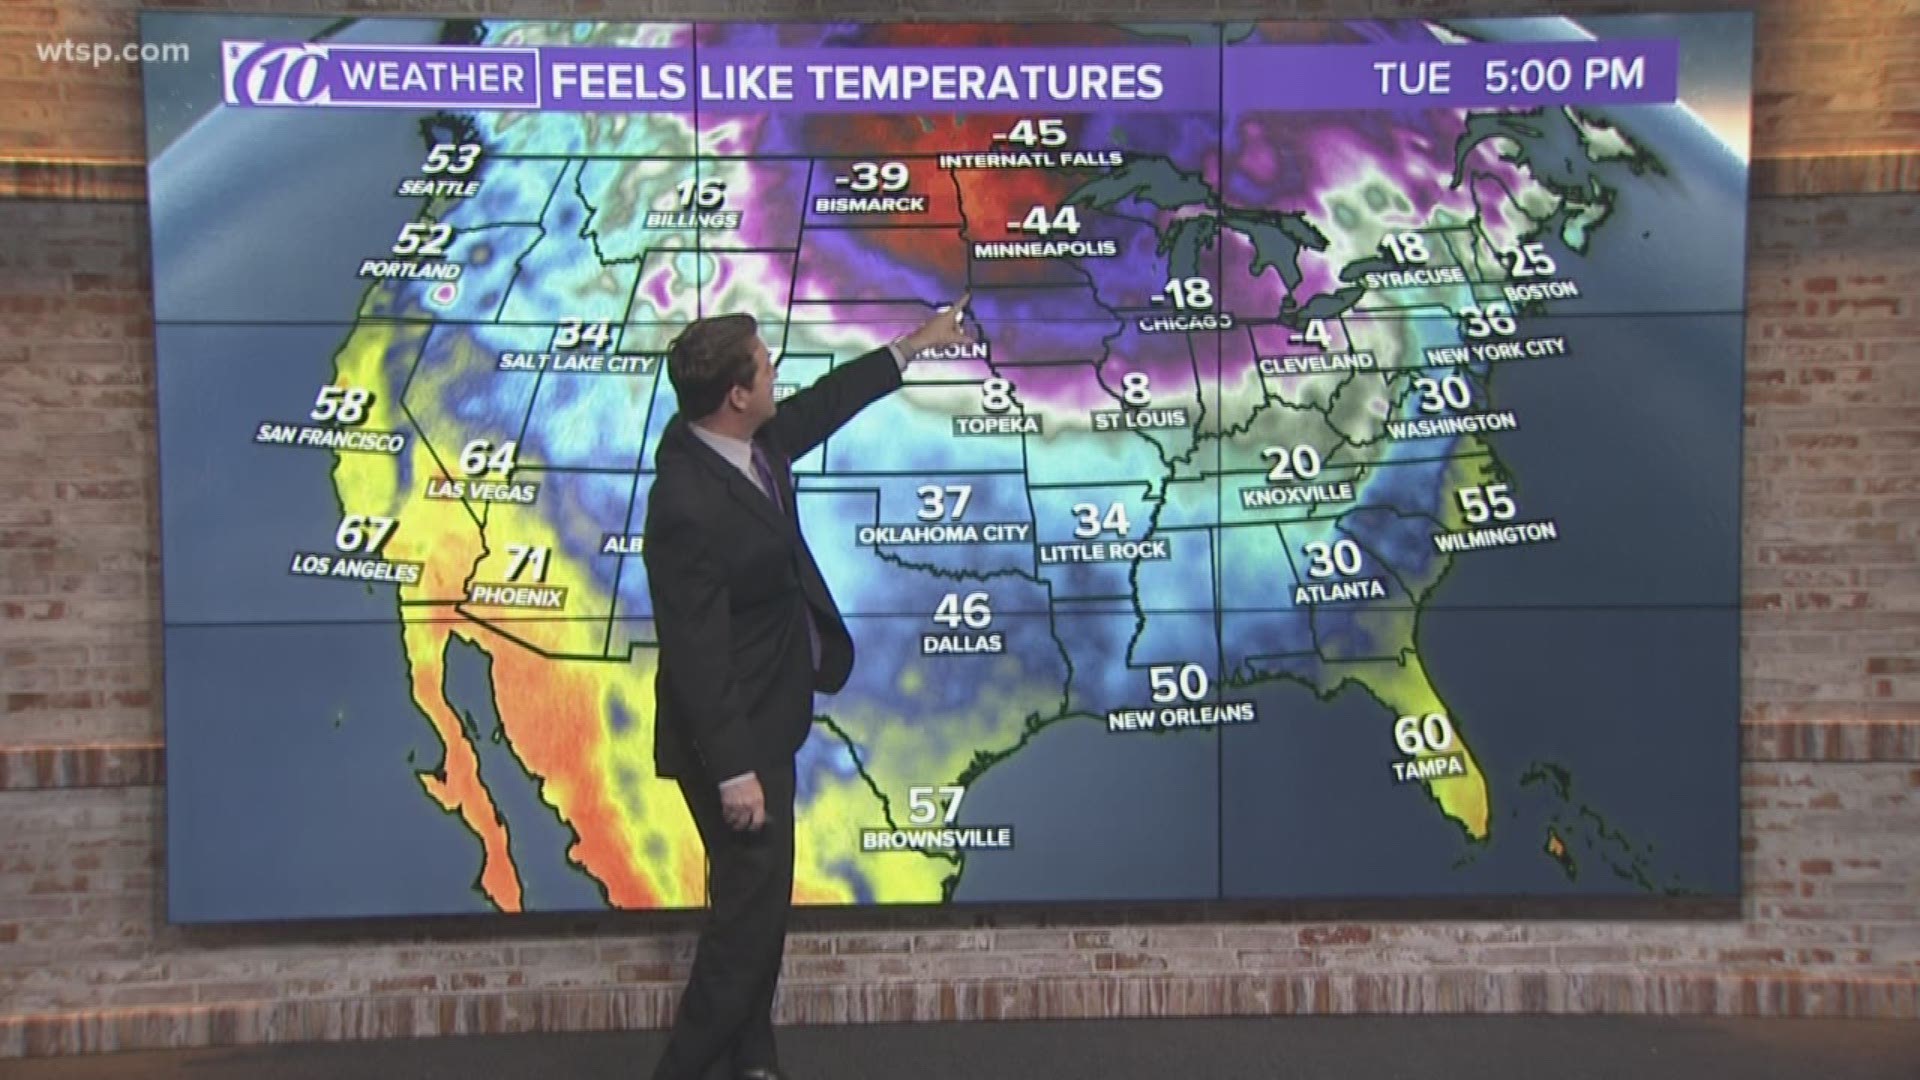 Life-threatening cold air is moving into parts of the U.S. in the wake of a major winter storm.